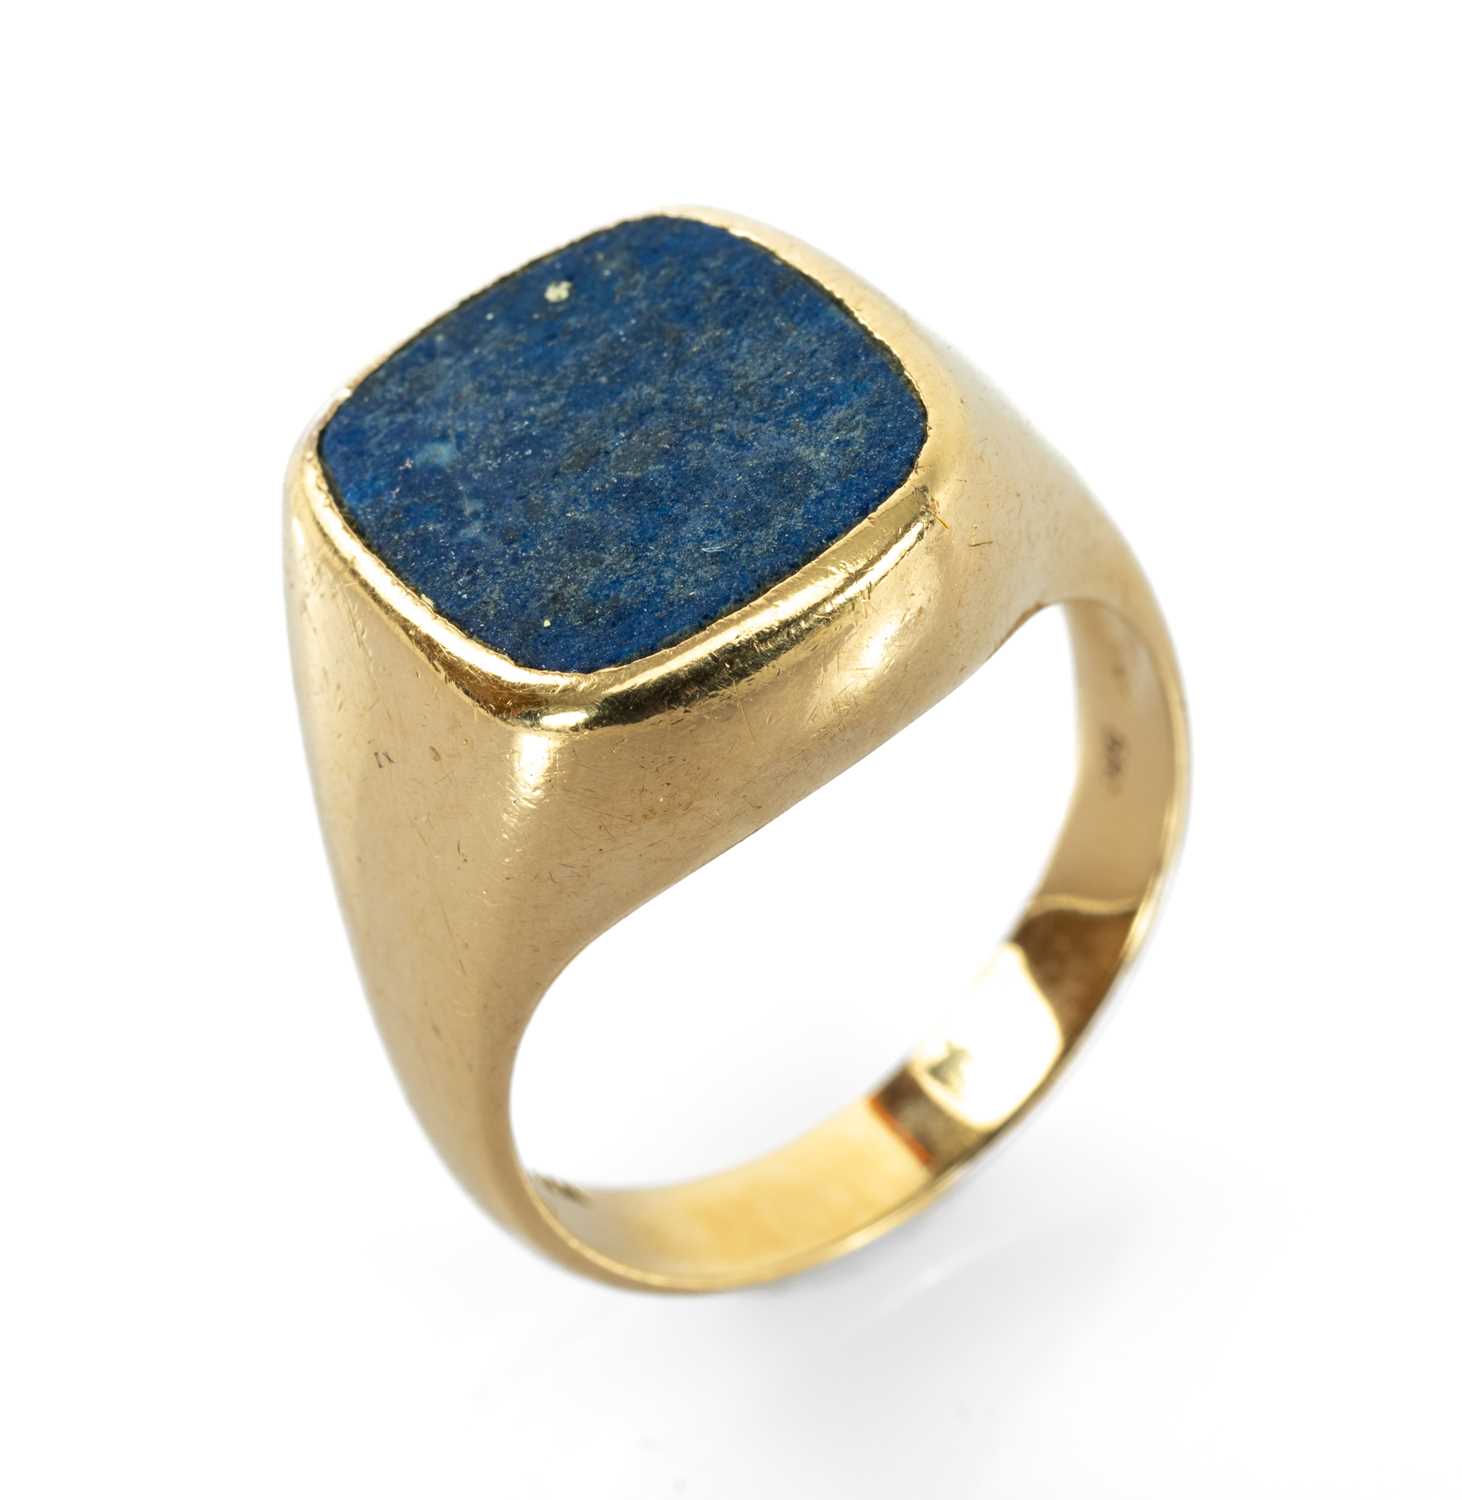 14K GOLD LAPIS LAZULI RING, ring size T, 9.8gms Provenance: private collection Gwynedd Comments: